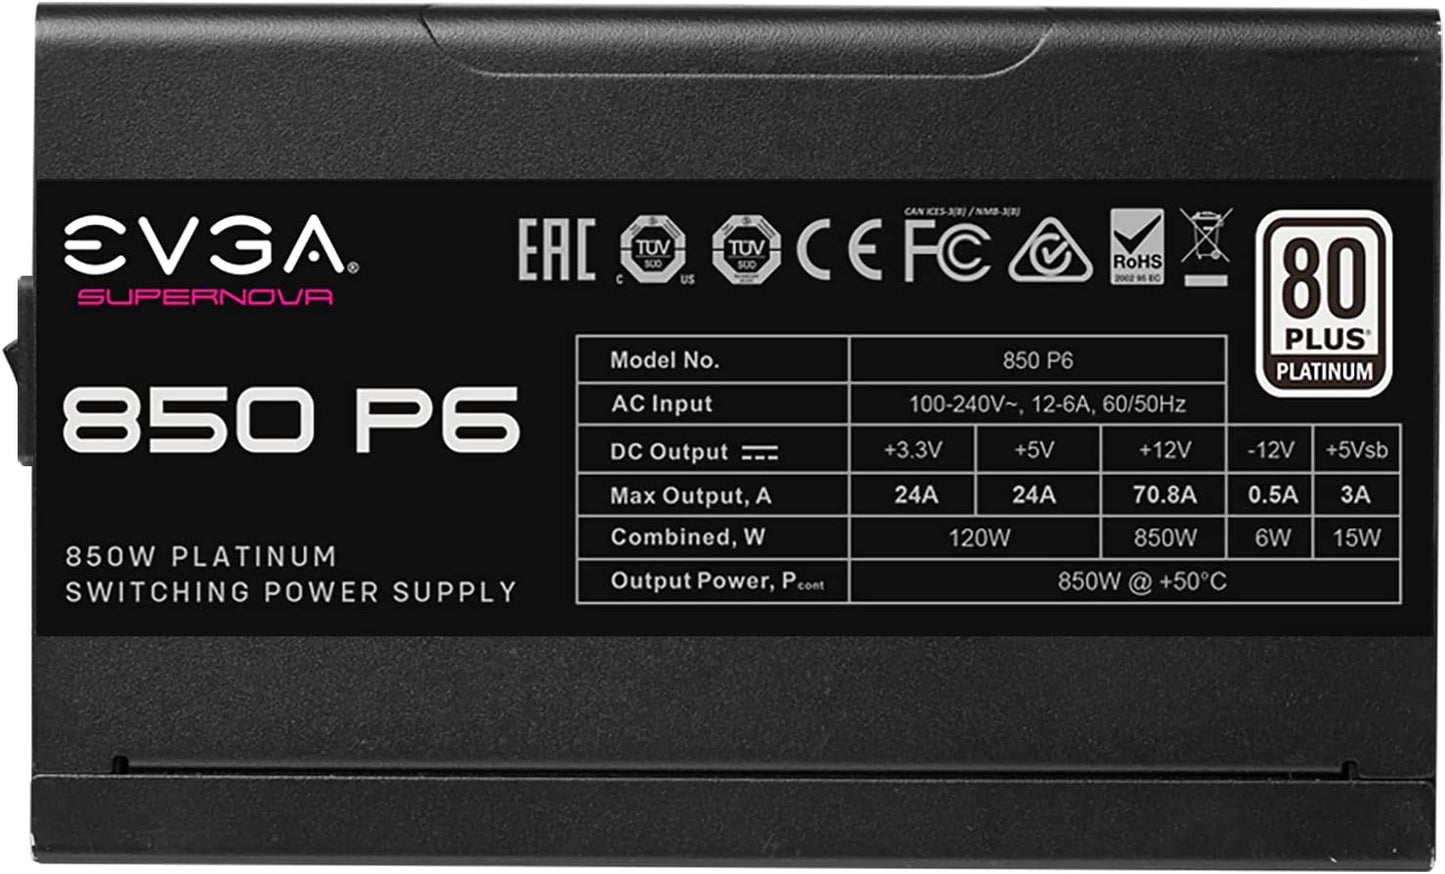 EVGA Supernova 850 P6, 80 Plus Platinum 850W, Fully Modular, Eco Mode with FDB Fan, 10 Year Warranty, Includes Power ON Self Tester, Compact 140mm Size, Power Supply 220-P6-0850-X1 P6 850W